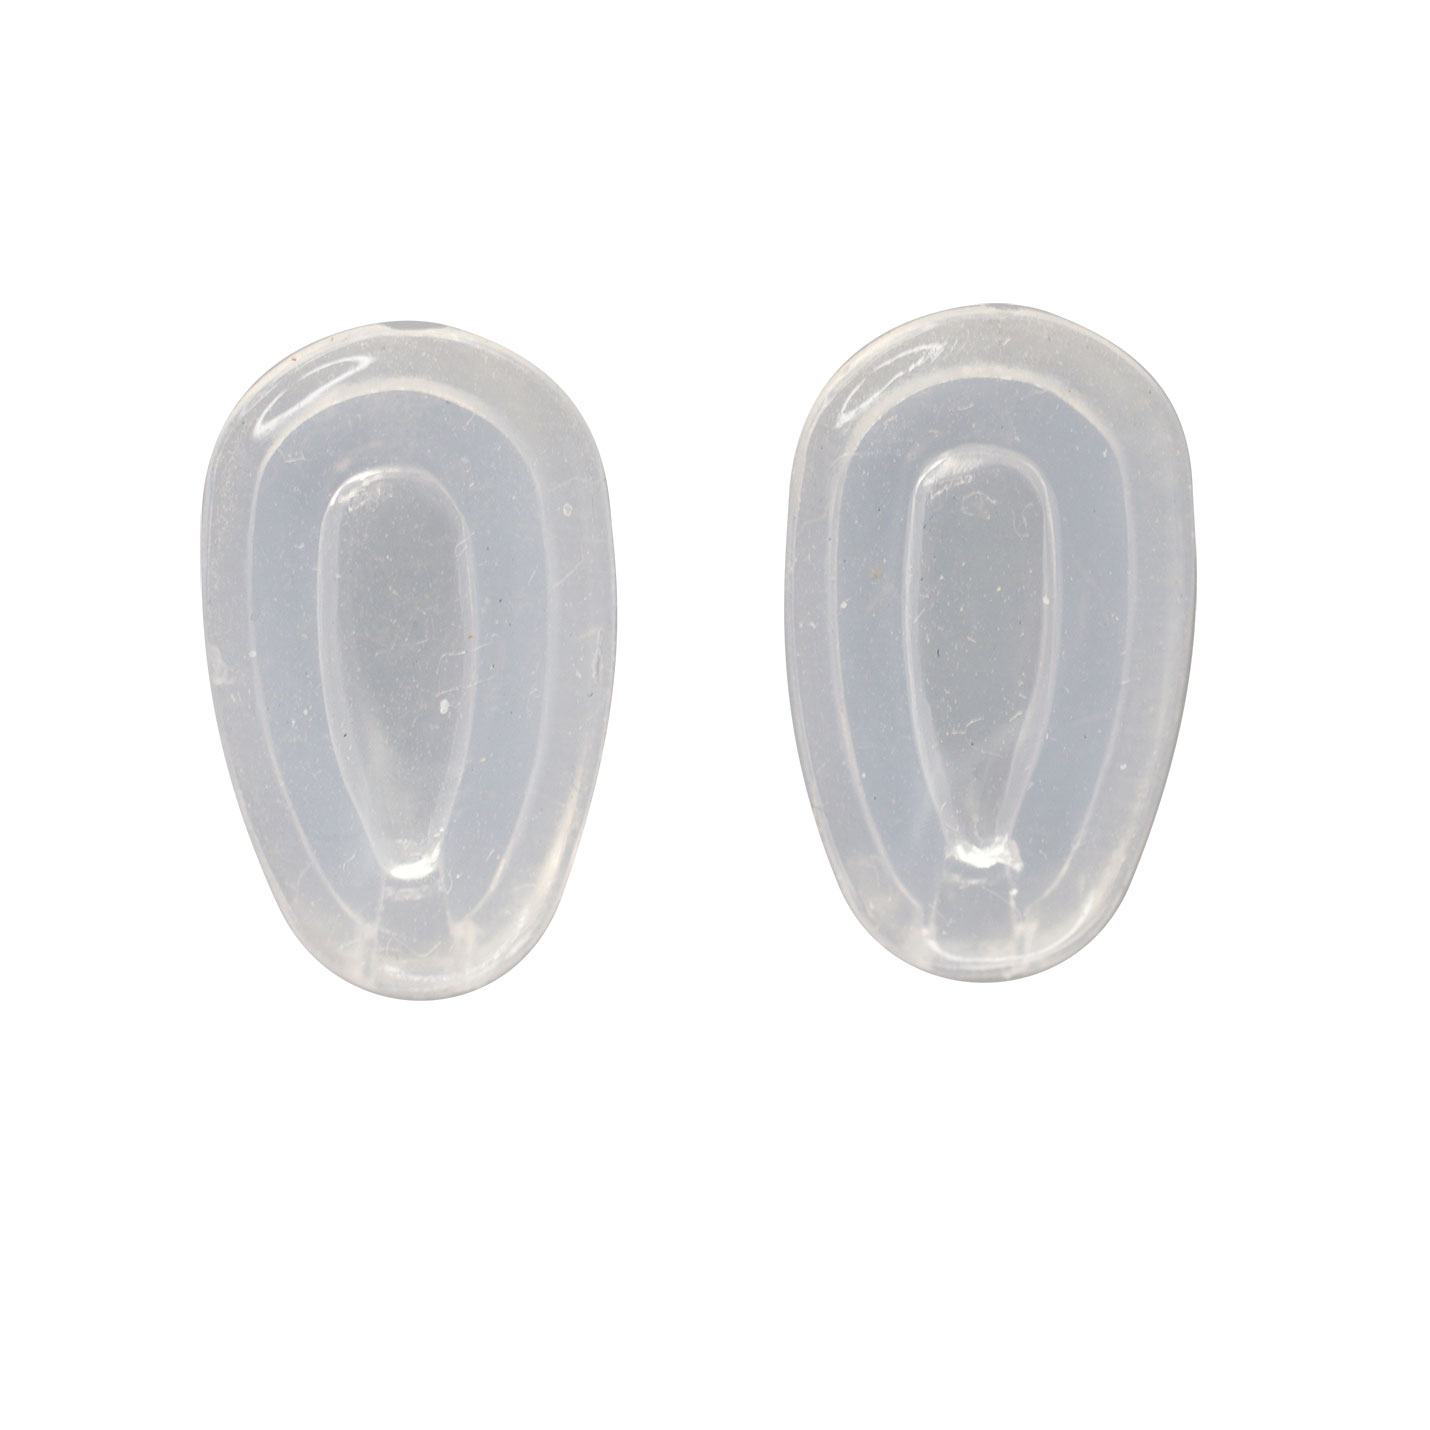 oakley replacement parts nose pads